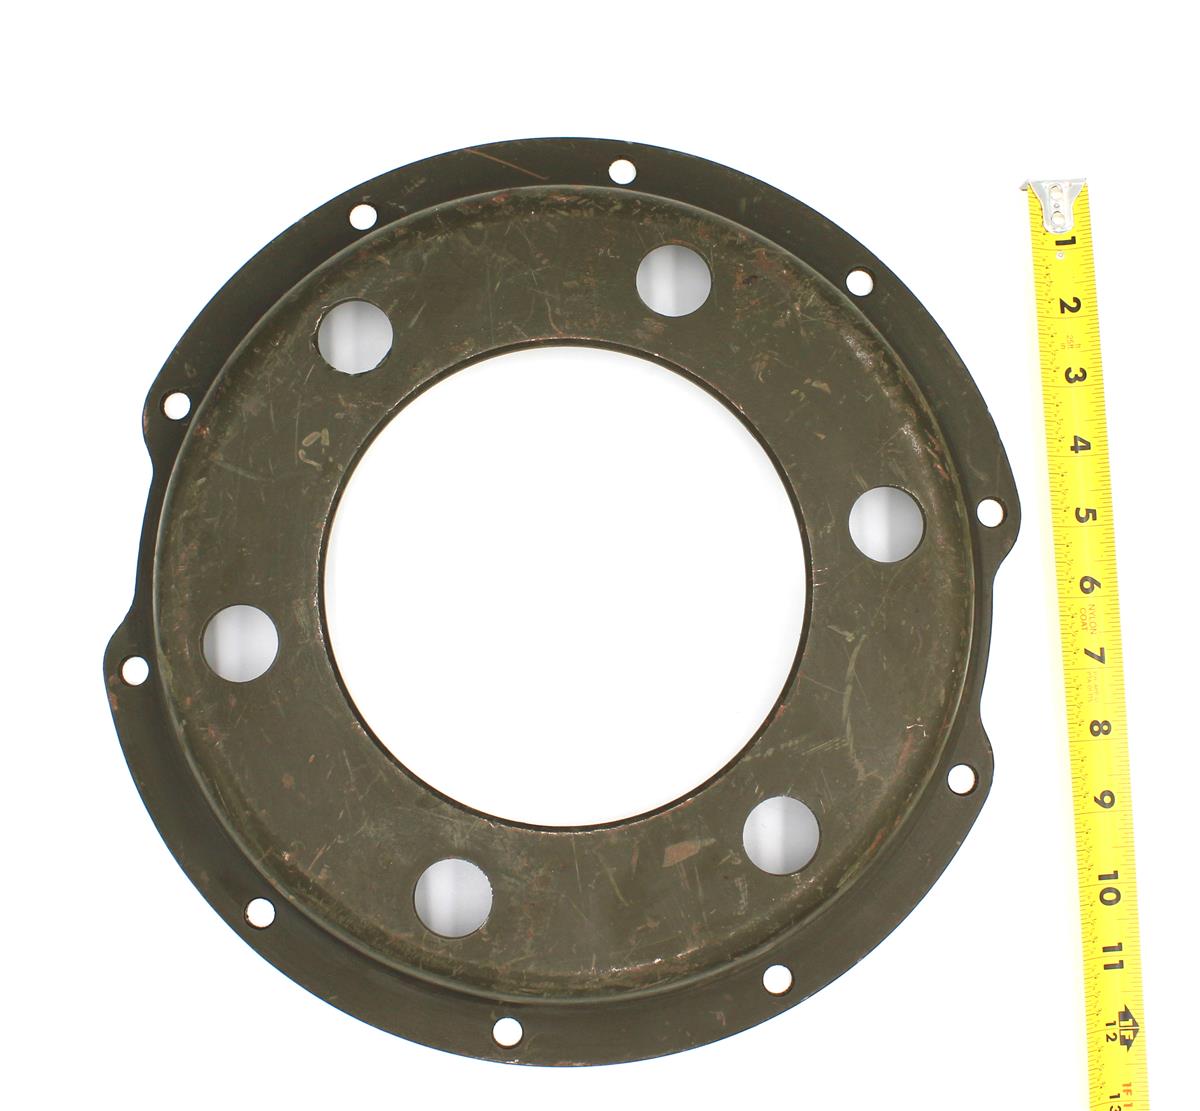 M35-843 | M35-843 Front Brake Drum Adapter Rockwell Steering Axle M35A2 (3).JPG